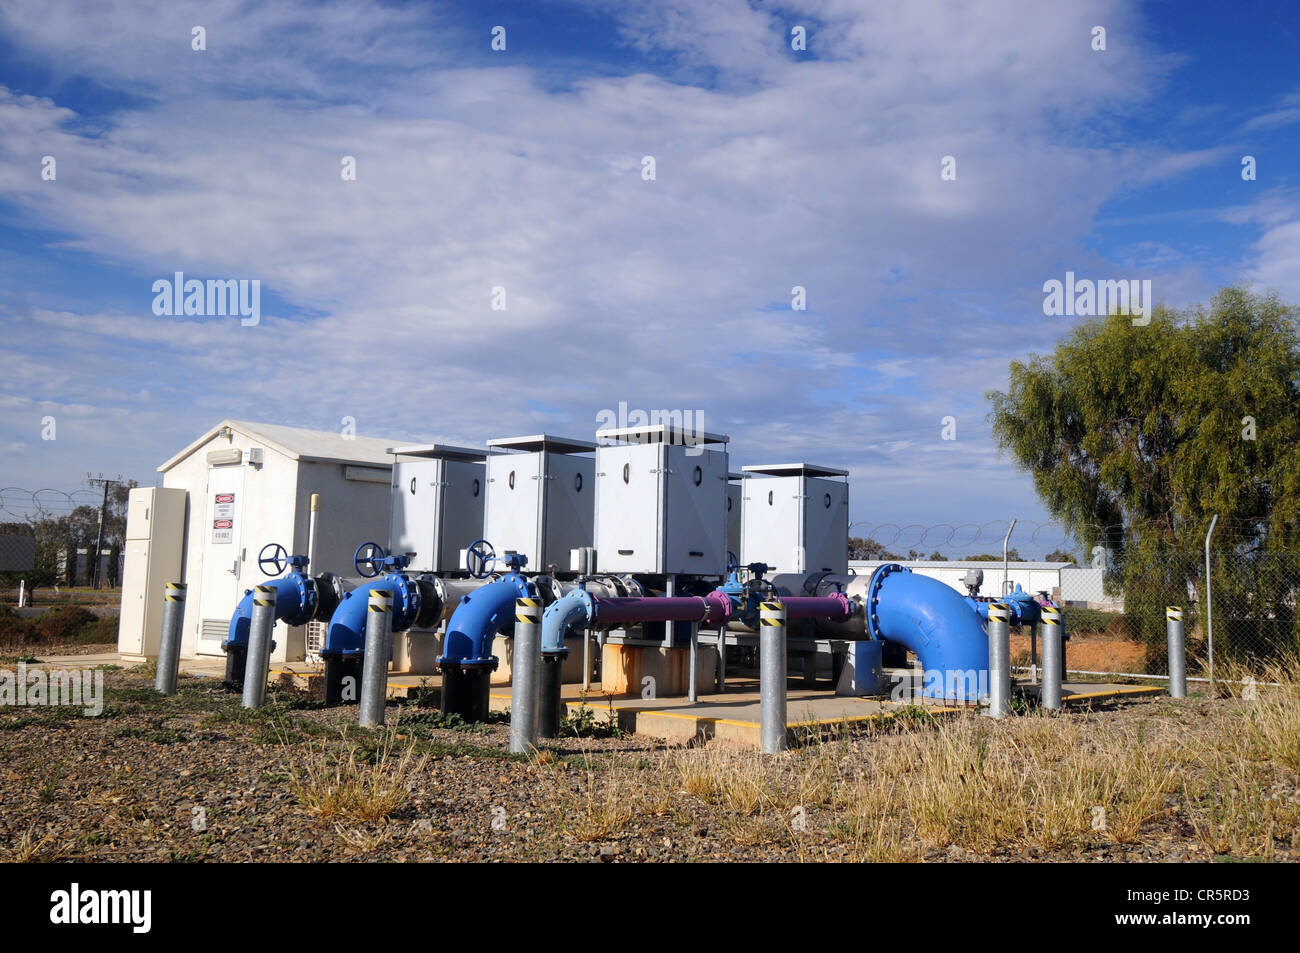 Pumping station with purple pipes containing water recycled from Adelaide's sewage, Virginia, near Adelaide, South Australia Stock Photo